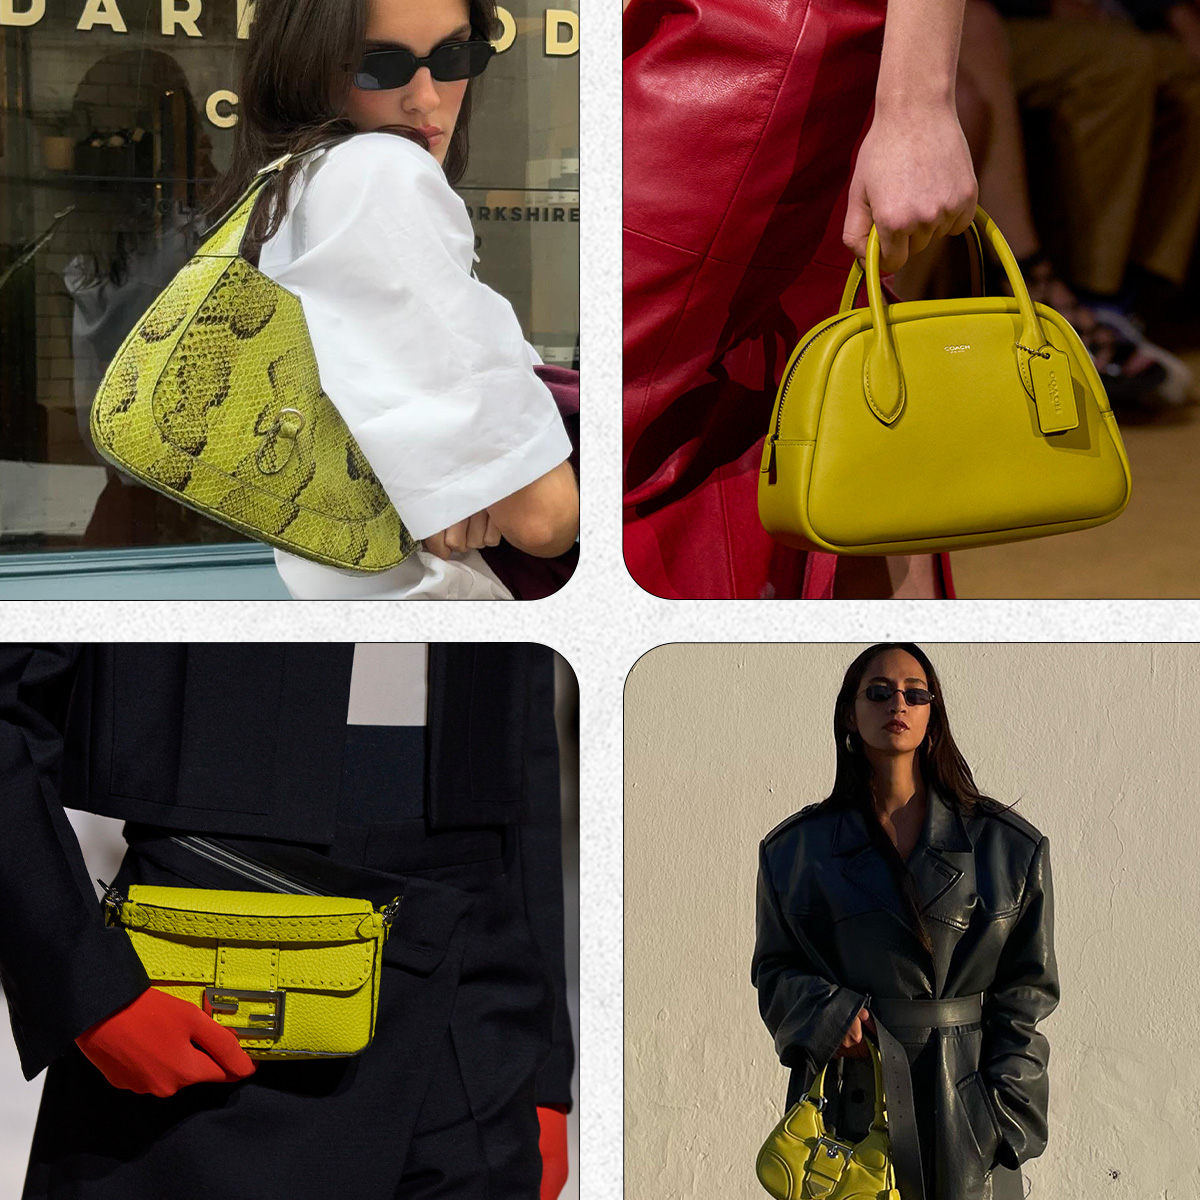 5 Anti-Trend Handbags From the '90s That Will Never Go Out of Style